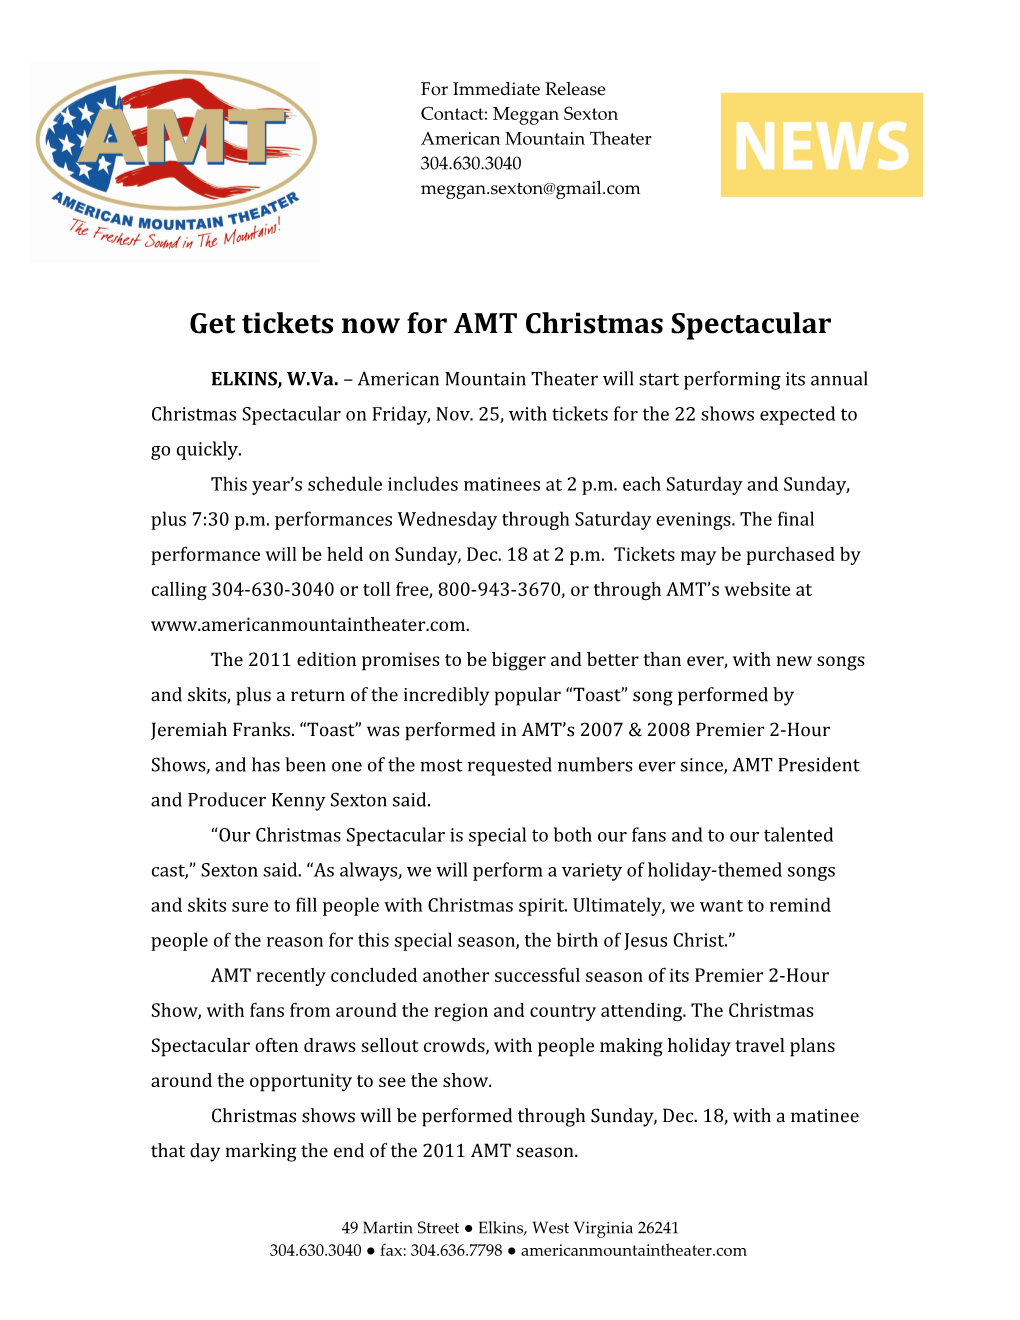 Get Tickets Now for AMT Christmas Spectacular